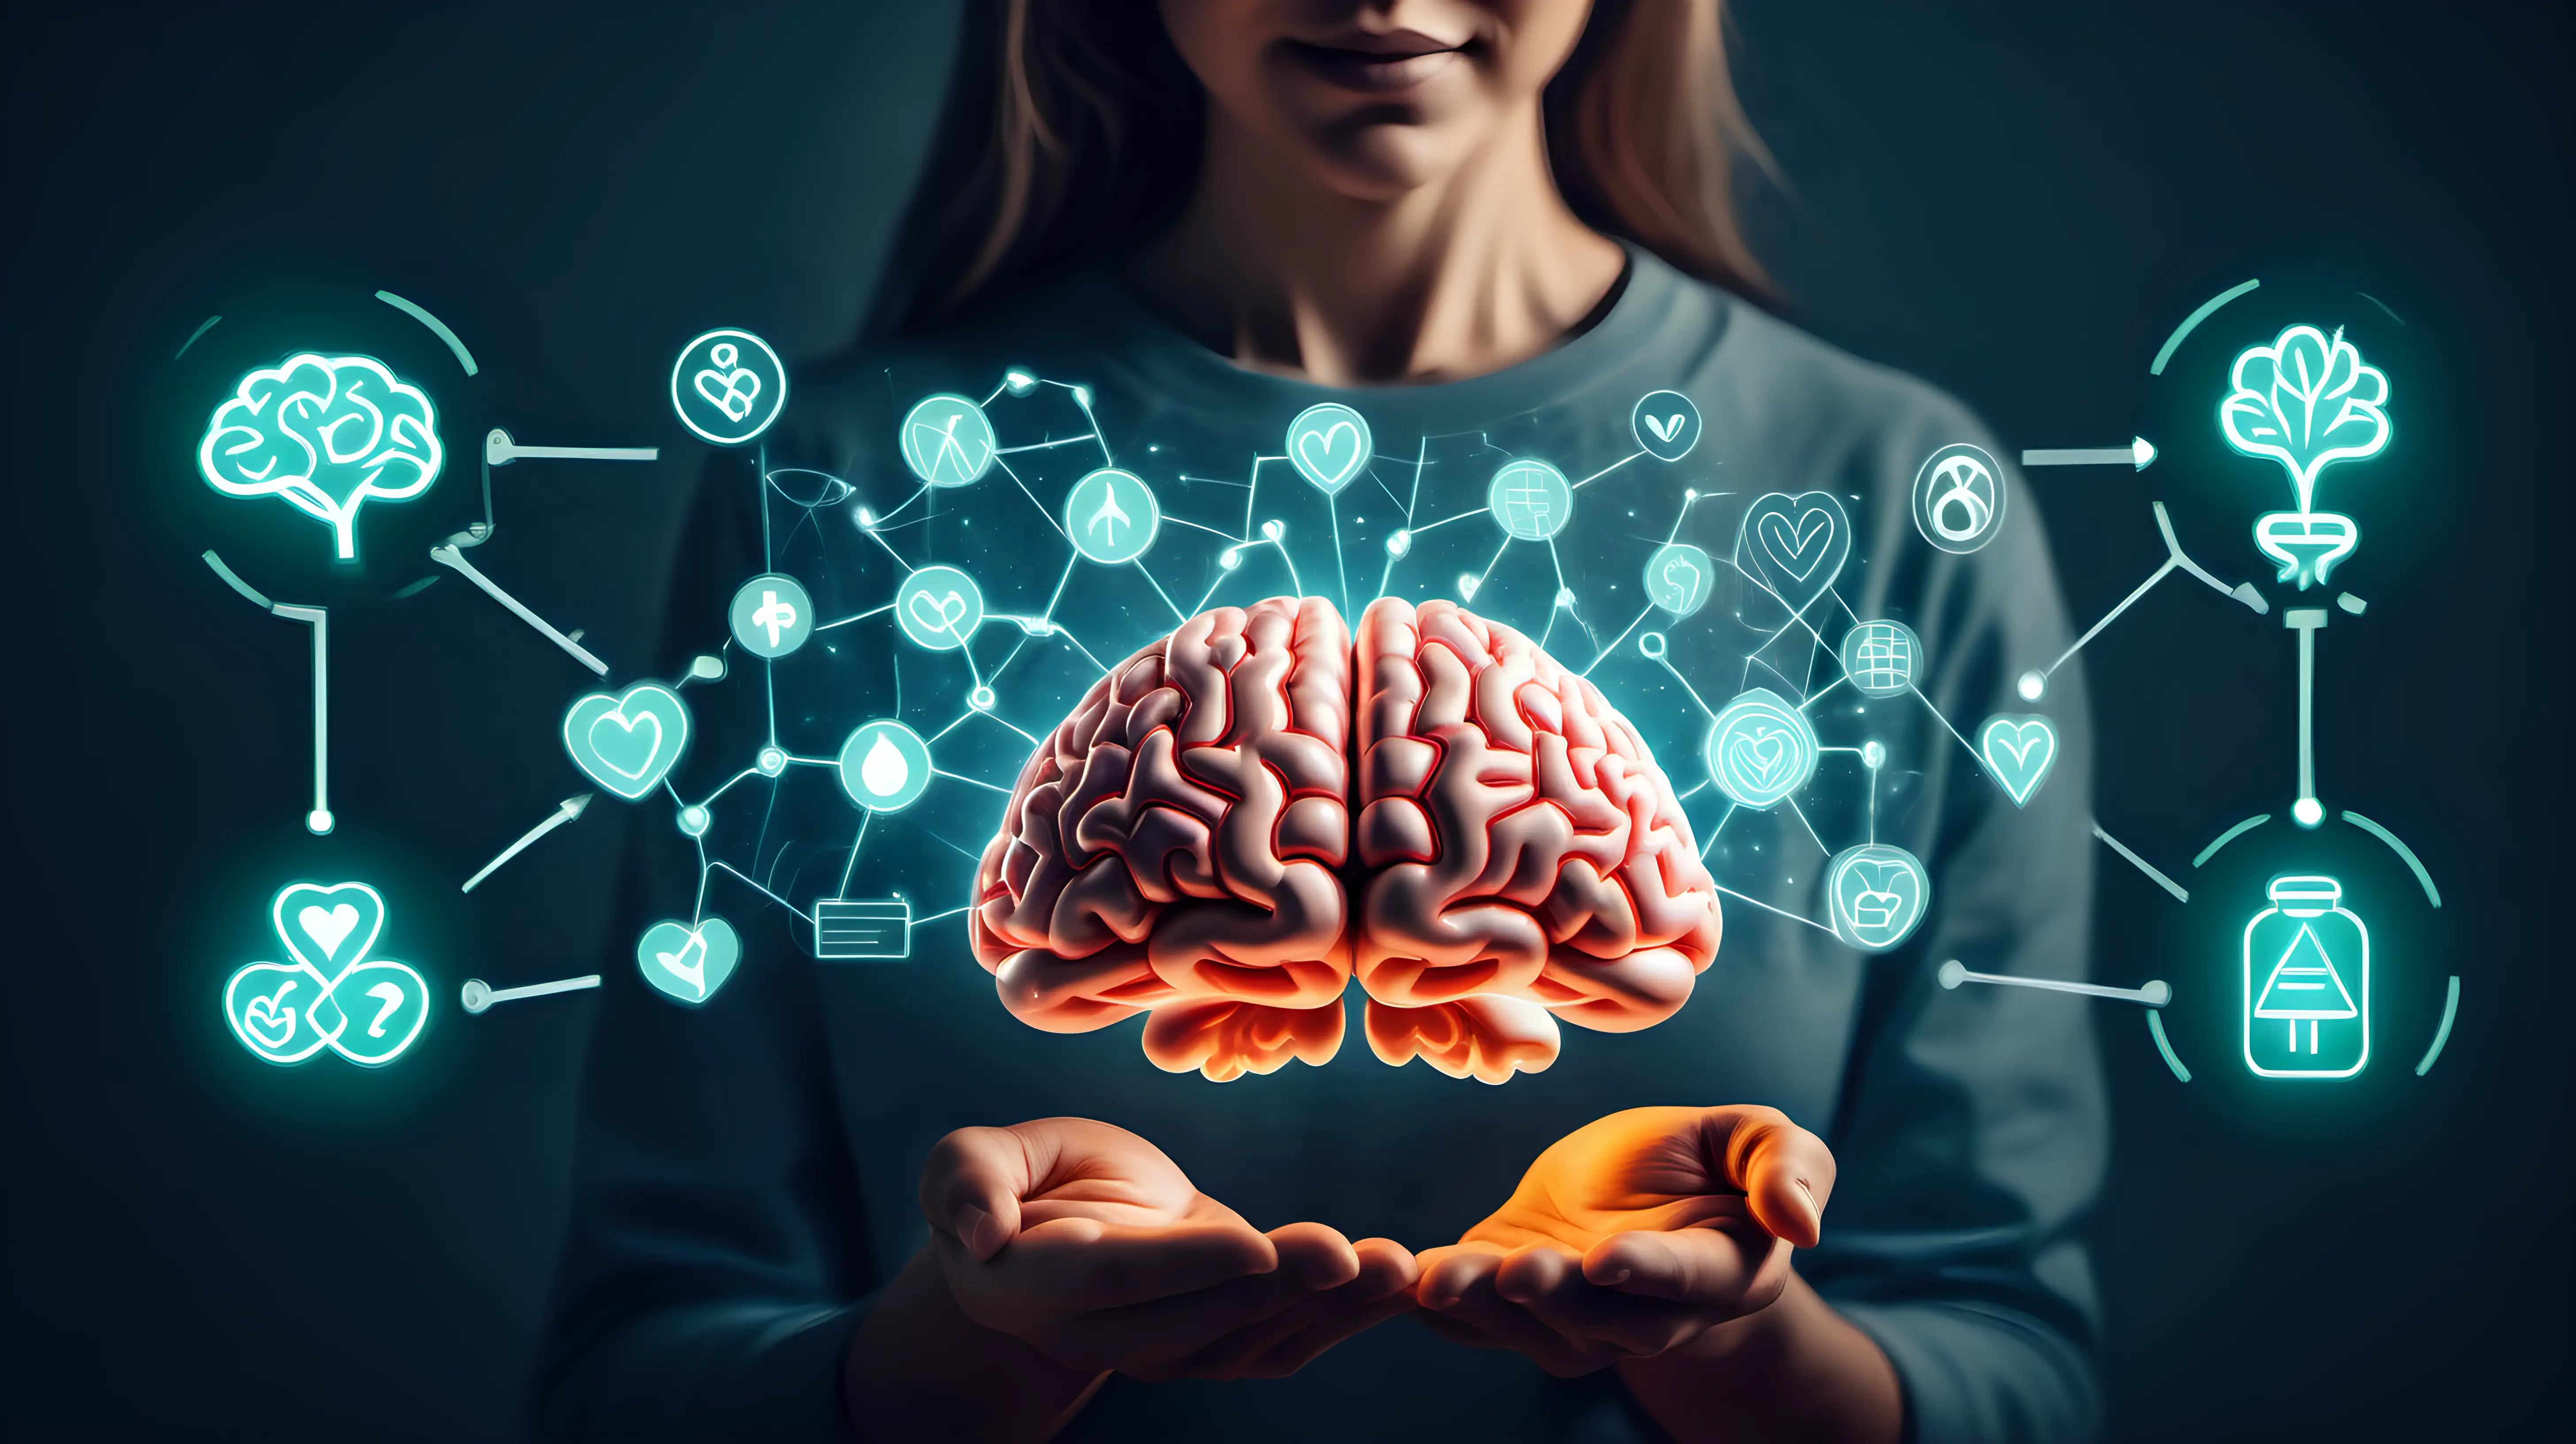 Cognitive Health Person Holding Luminous Brain and Healthy Lifestyle Symbols